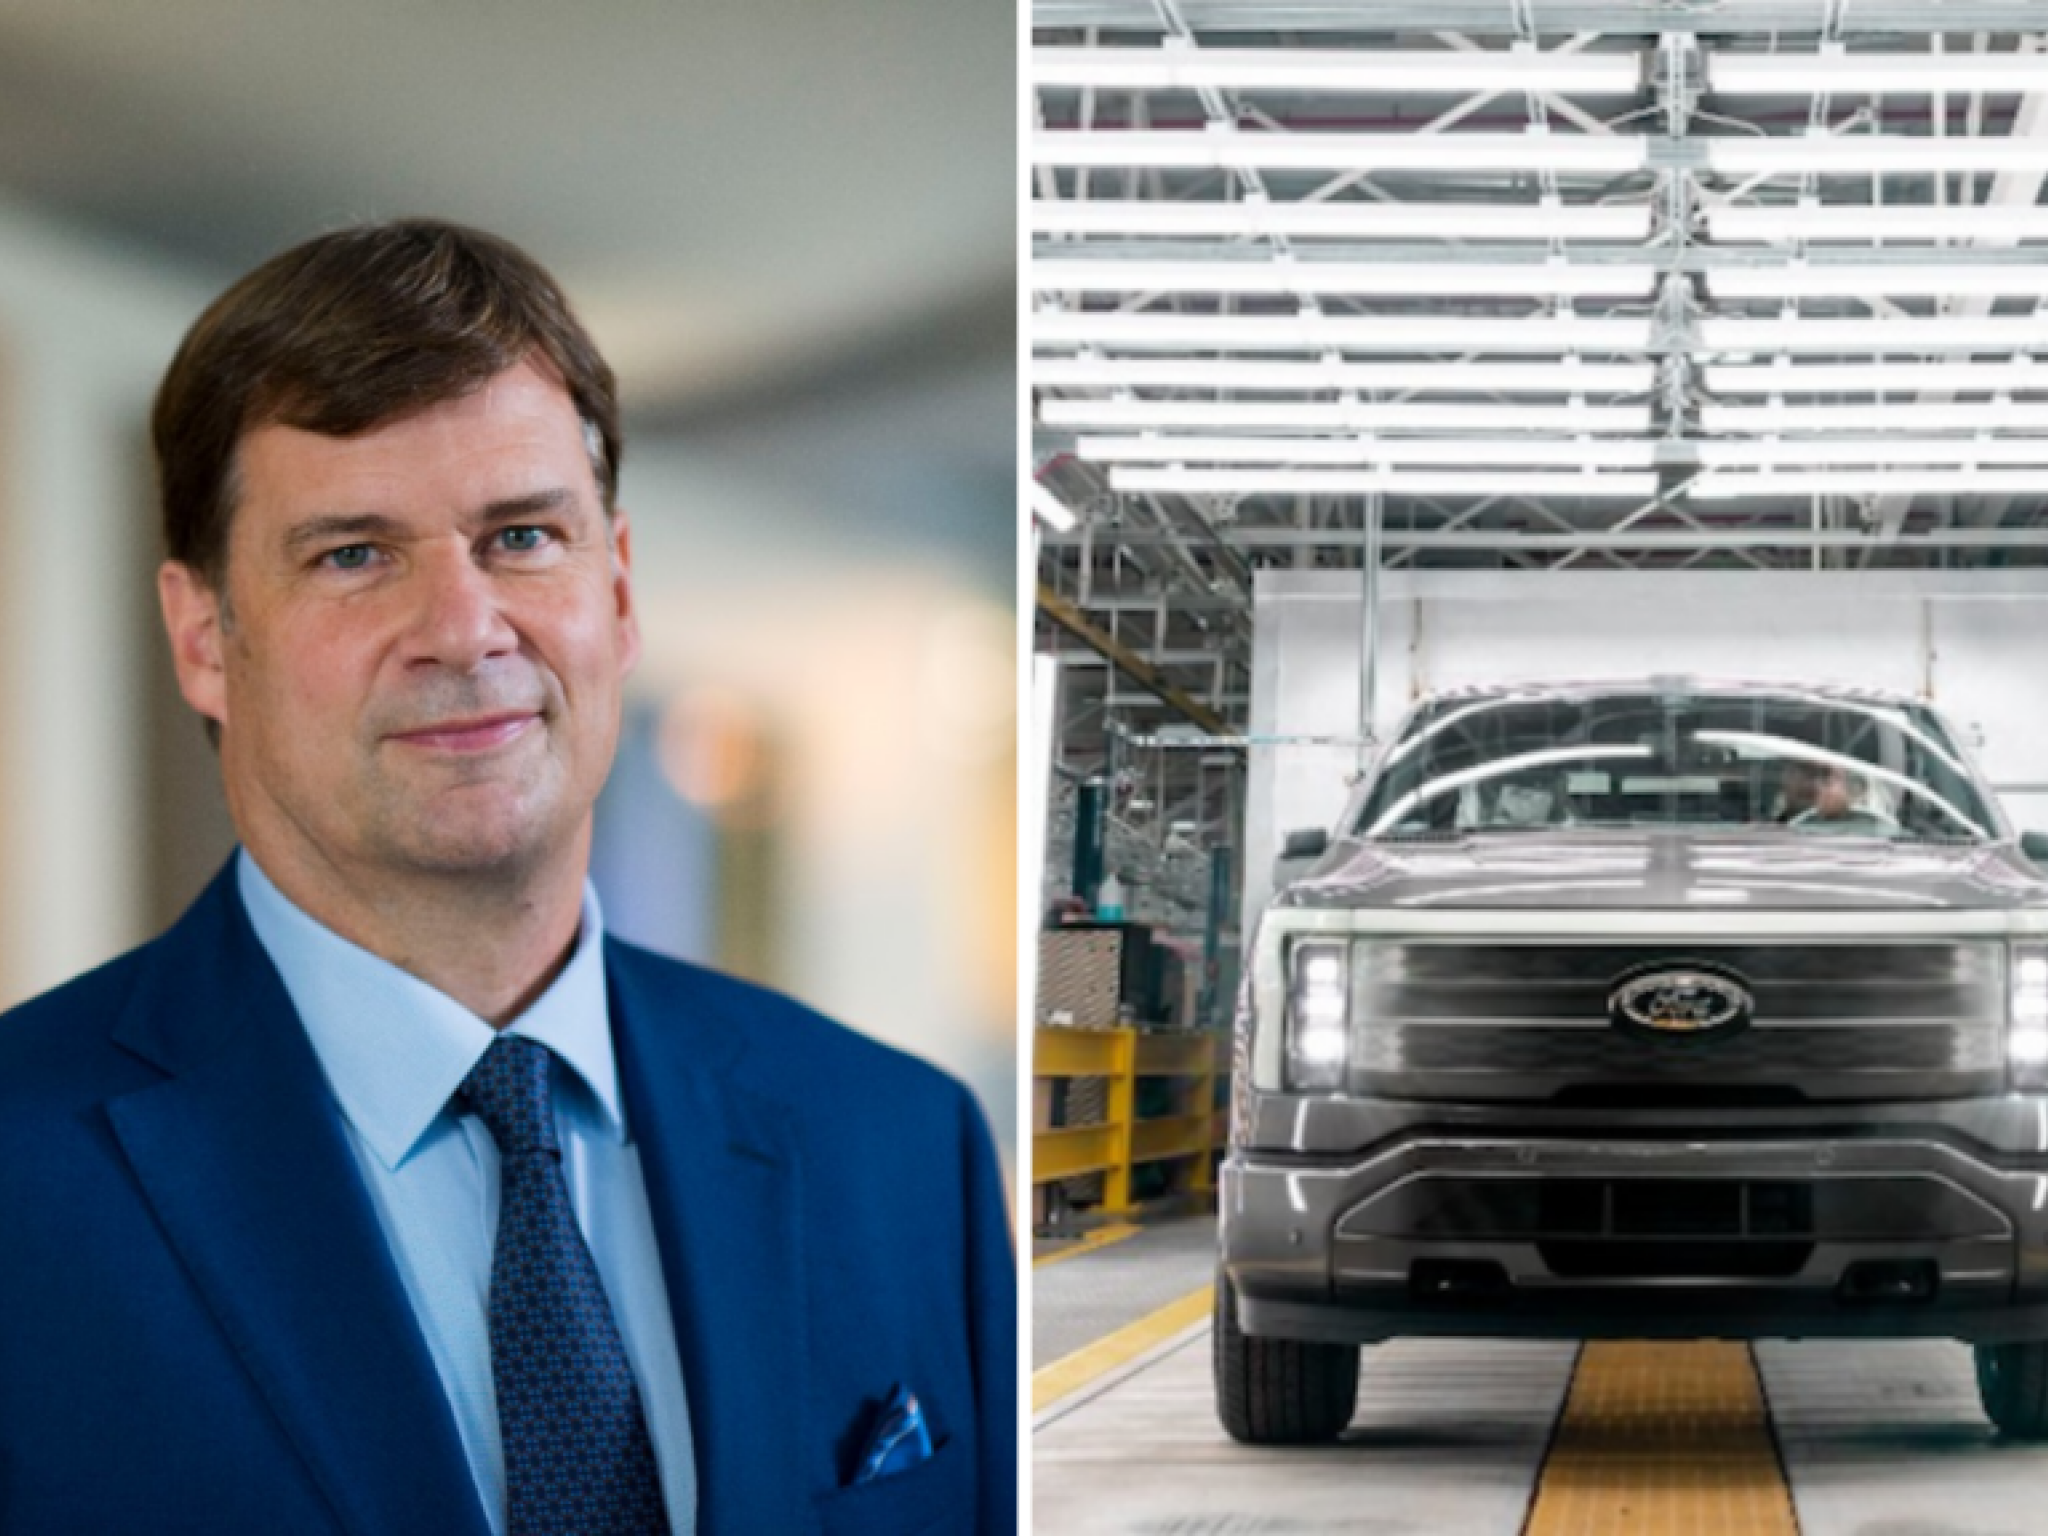  ford-ceo-farley-says-company-needs-to-move-past-monster-vehicles-to-be-profitable-in-ev-space-start-to-get-back-in-love-with-smaller-vehicles 